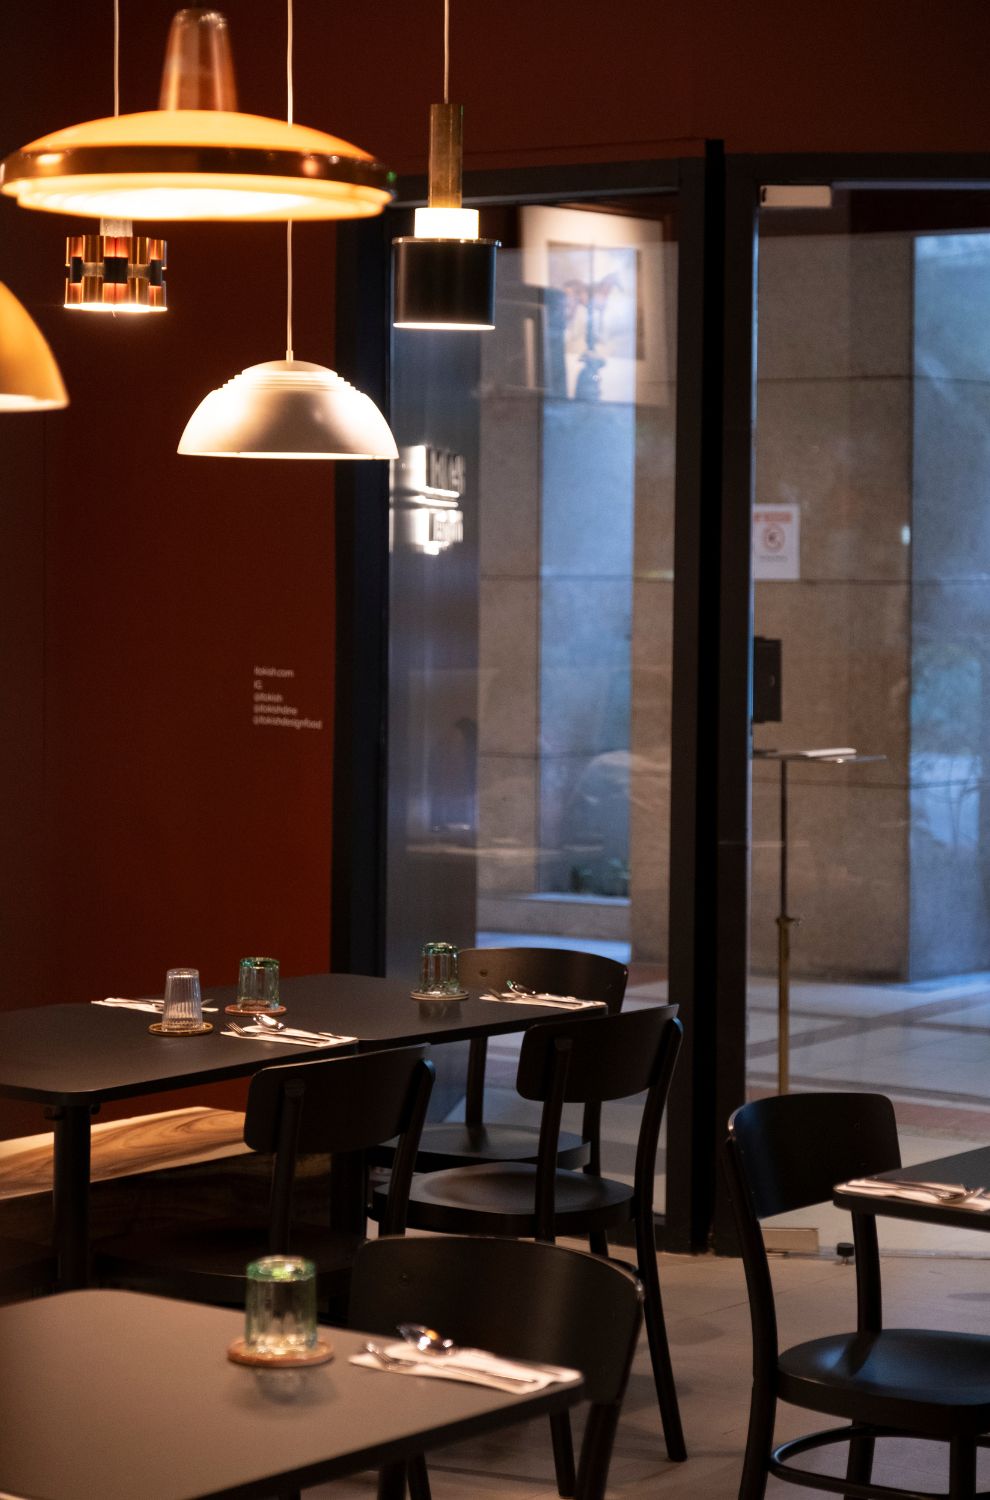 The minimalist dining area of Ito Kish Design Food with burgundy walls and vintage light fixtures.